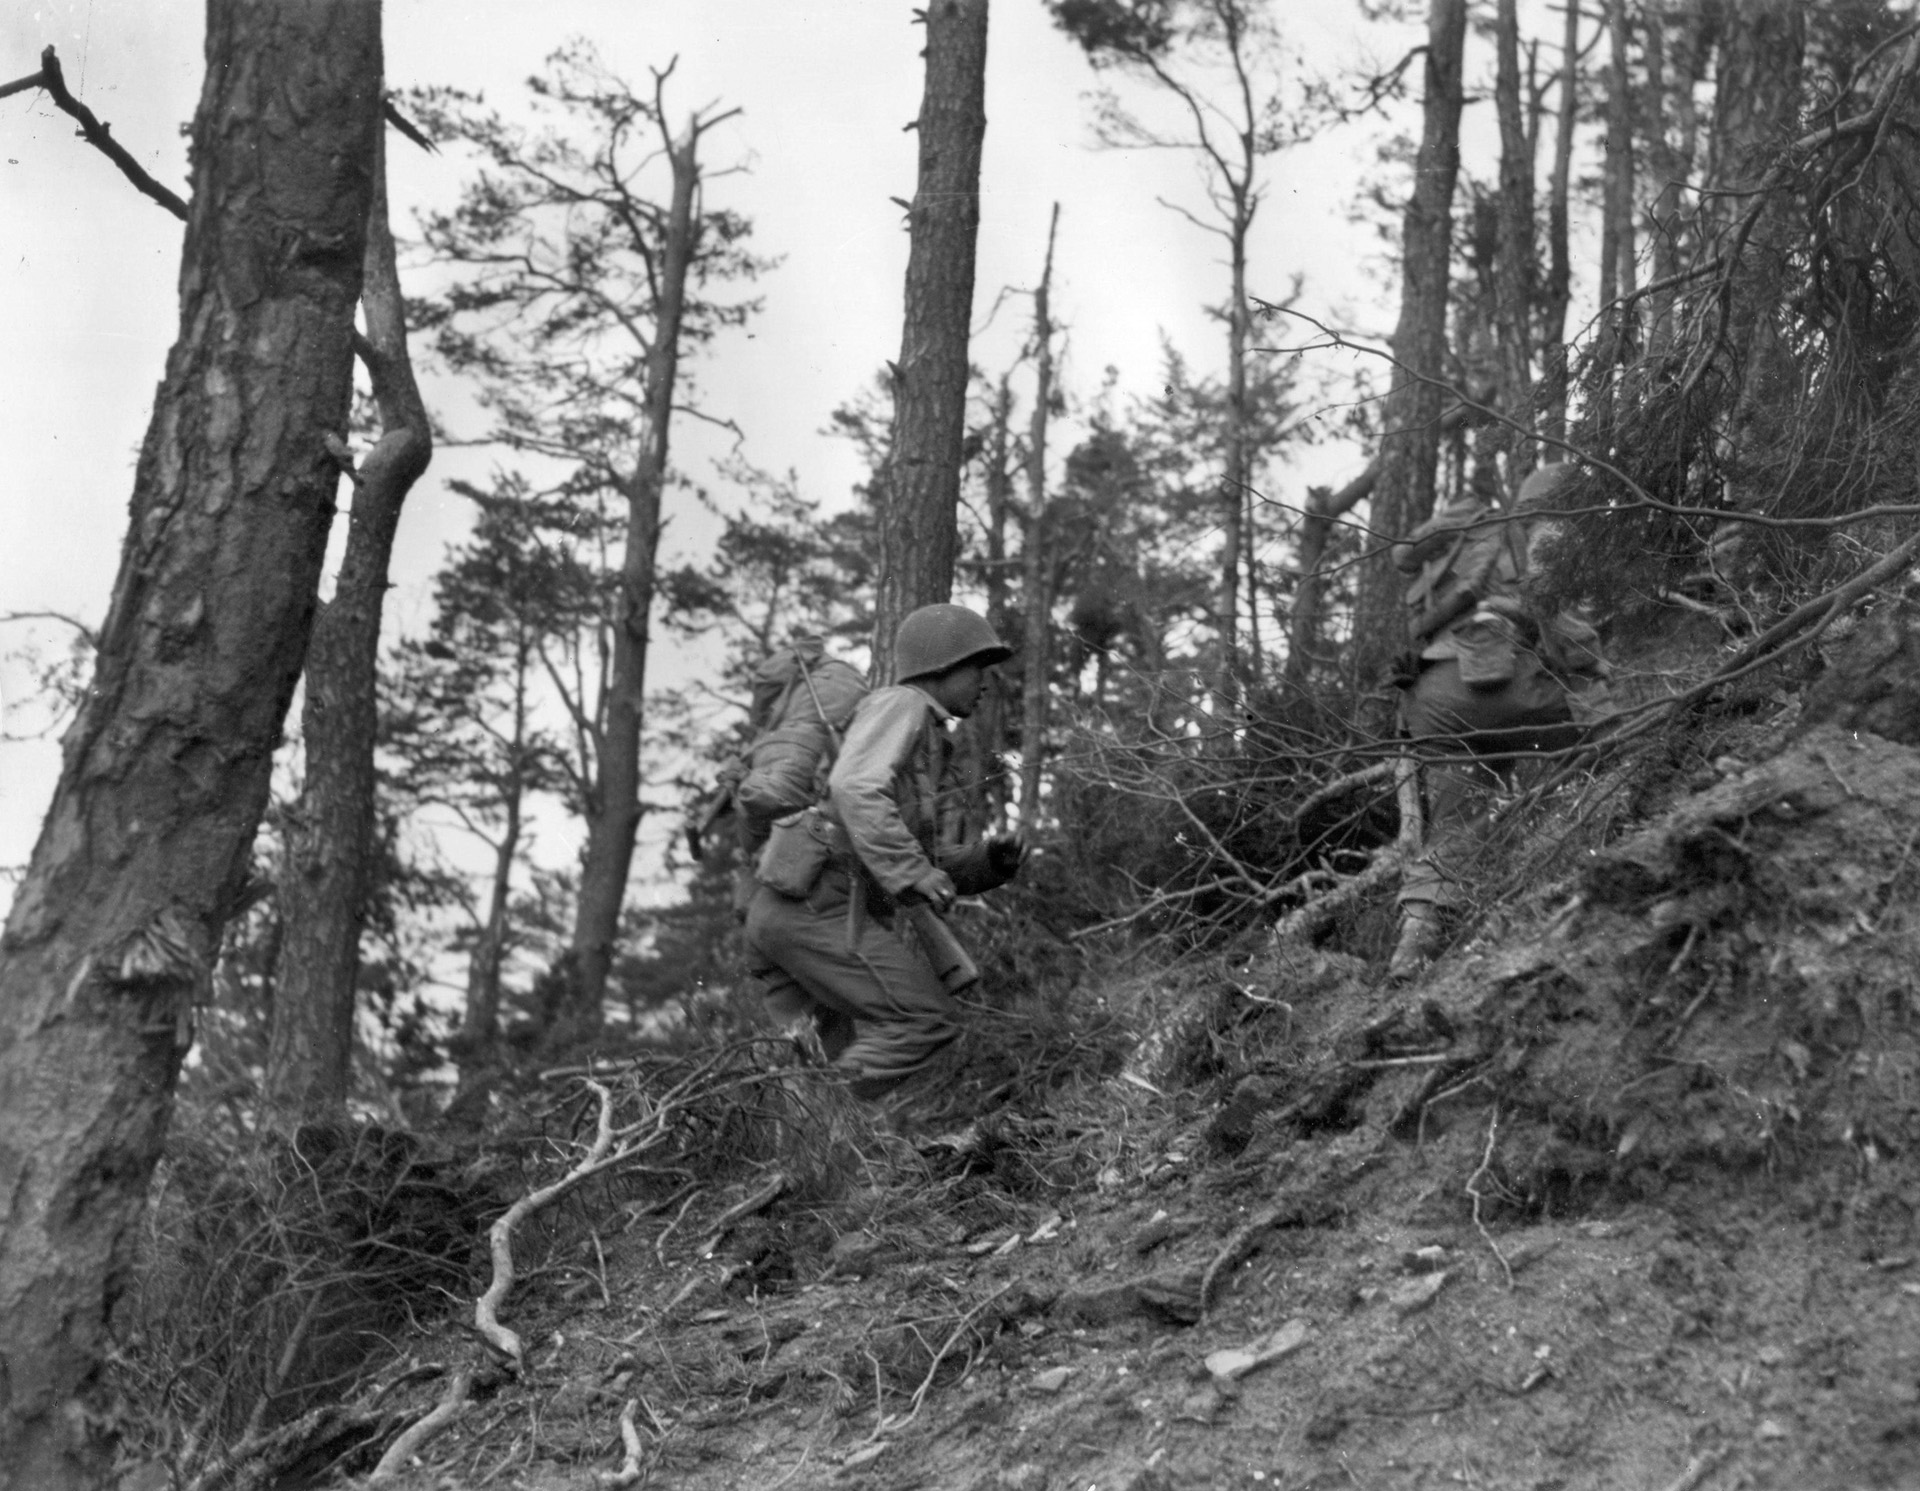 After heavy fighting in Italy, the 442nd RCT was redeployed to southern France in October 1944. Here 442nd troops, now attached to the 36th Infantry Division, climb a steep hill, October 24, 1944.